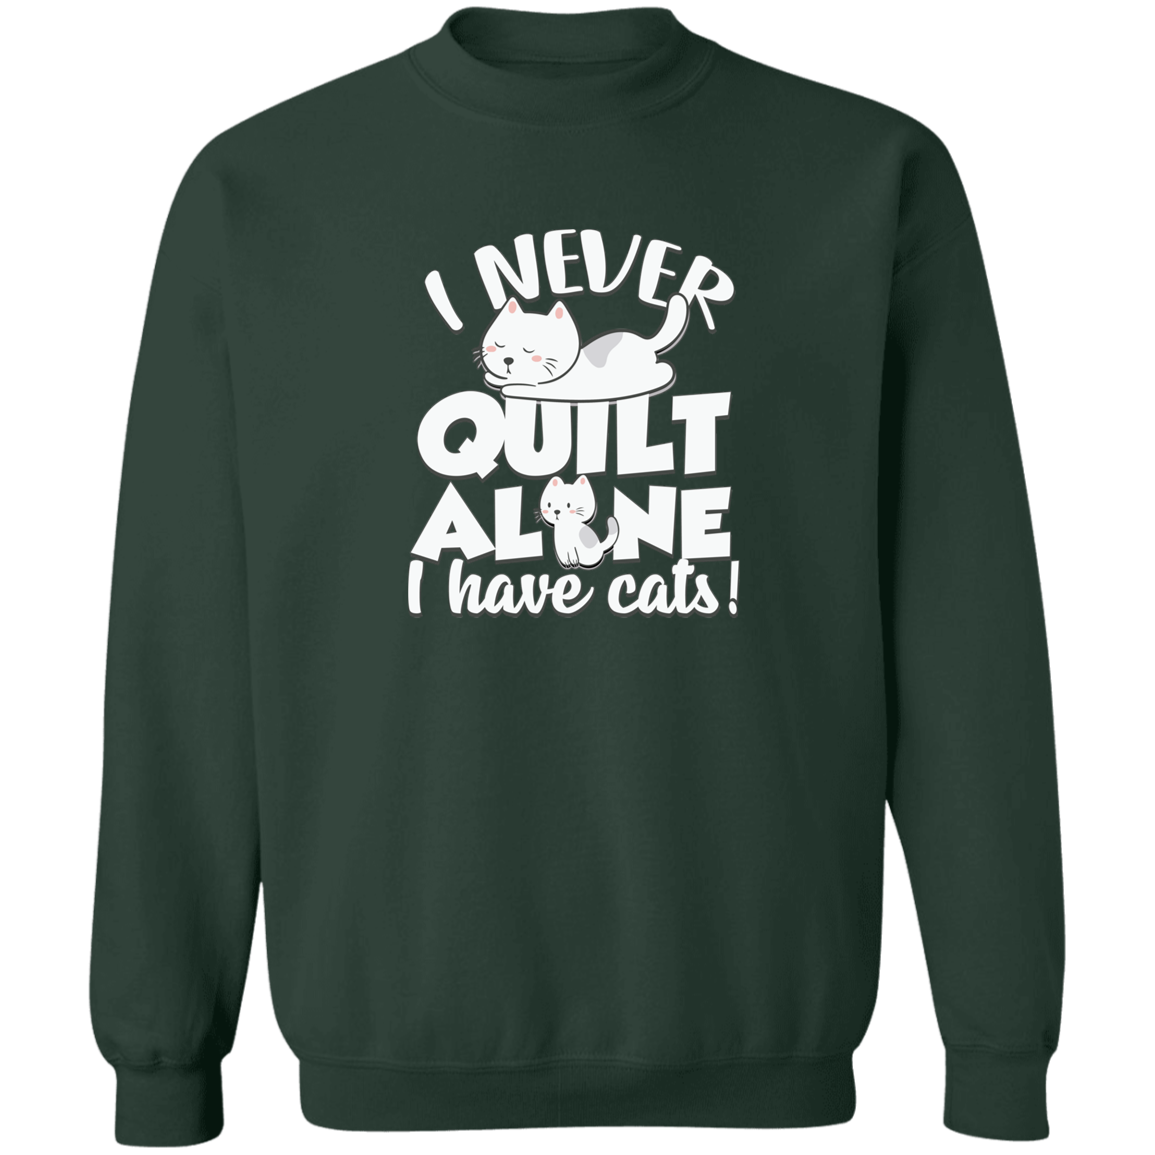 I Never Quilt Alone - I Have Cats! Sweatshirt